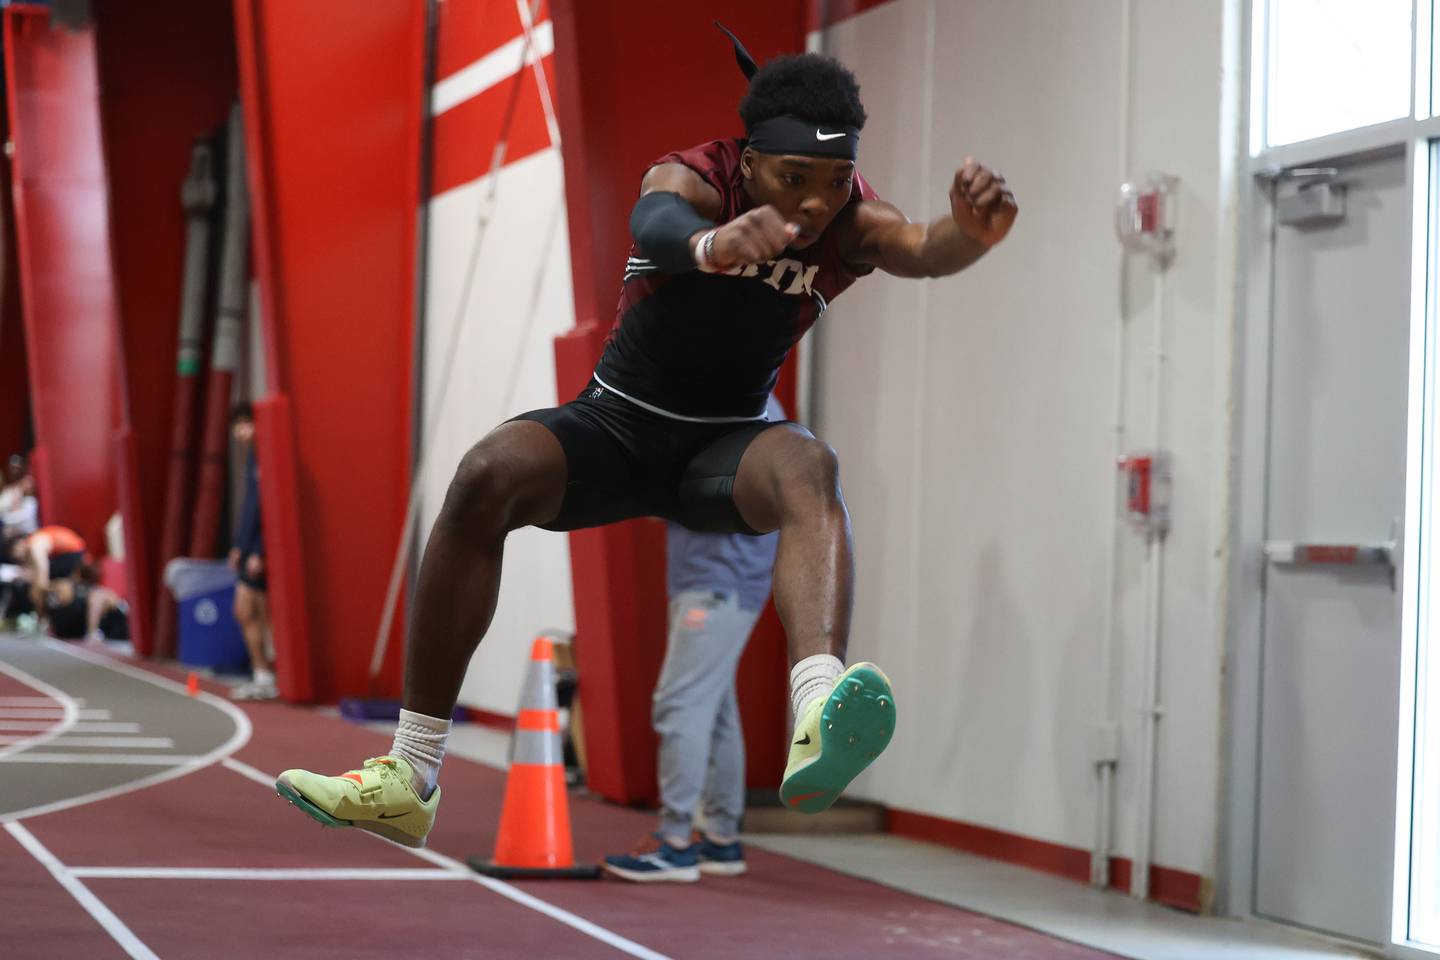 Plainfield North’s Keith Cyracus finished fourth in the long jump in the Southwest Prairie Conference indoor track and field championship at Lewis University in Romeoville.